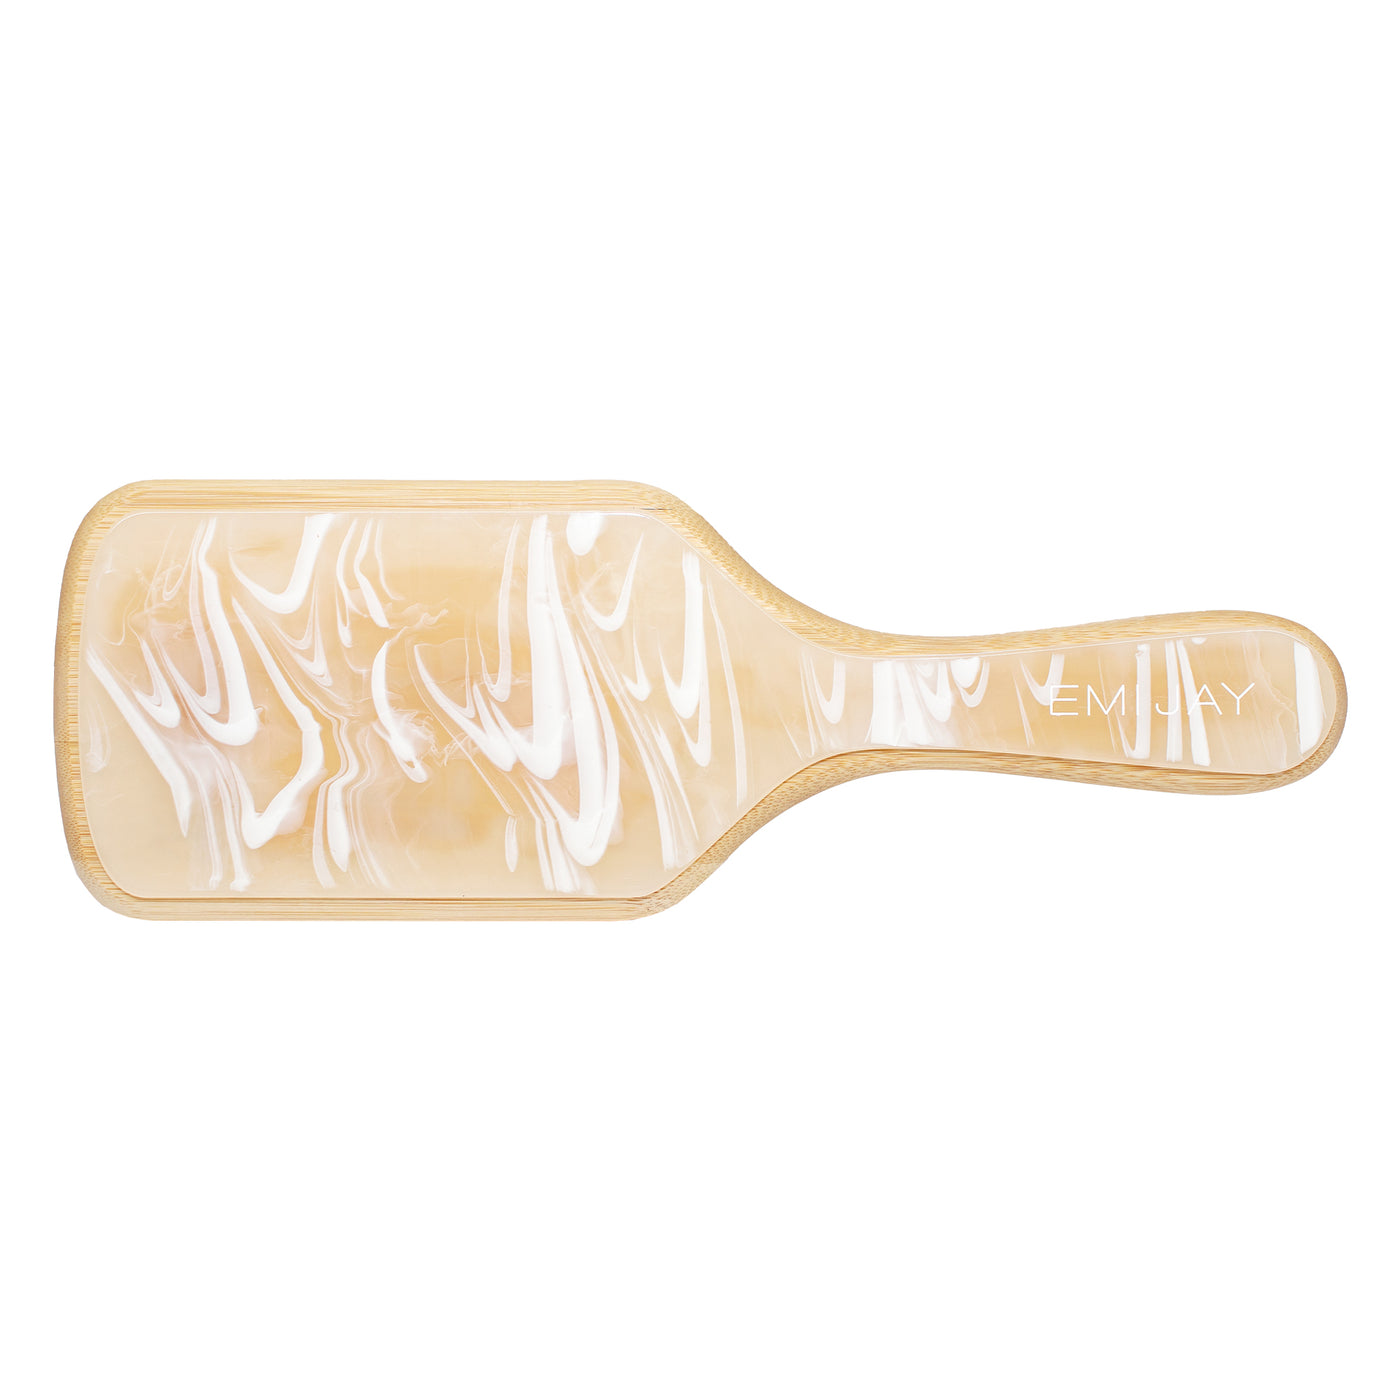 Bamboo Paddle Brush in Leche